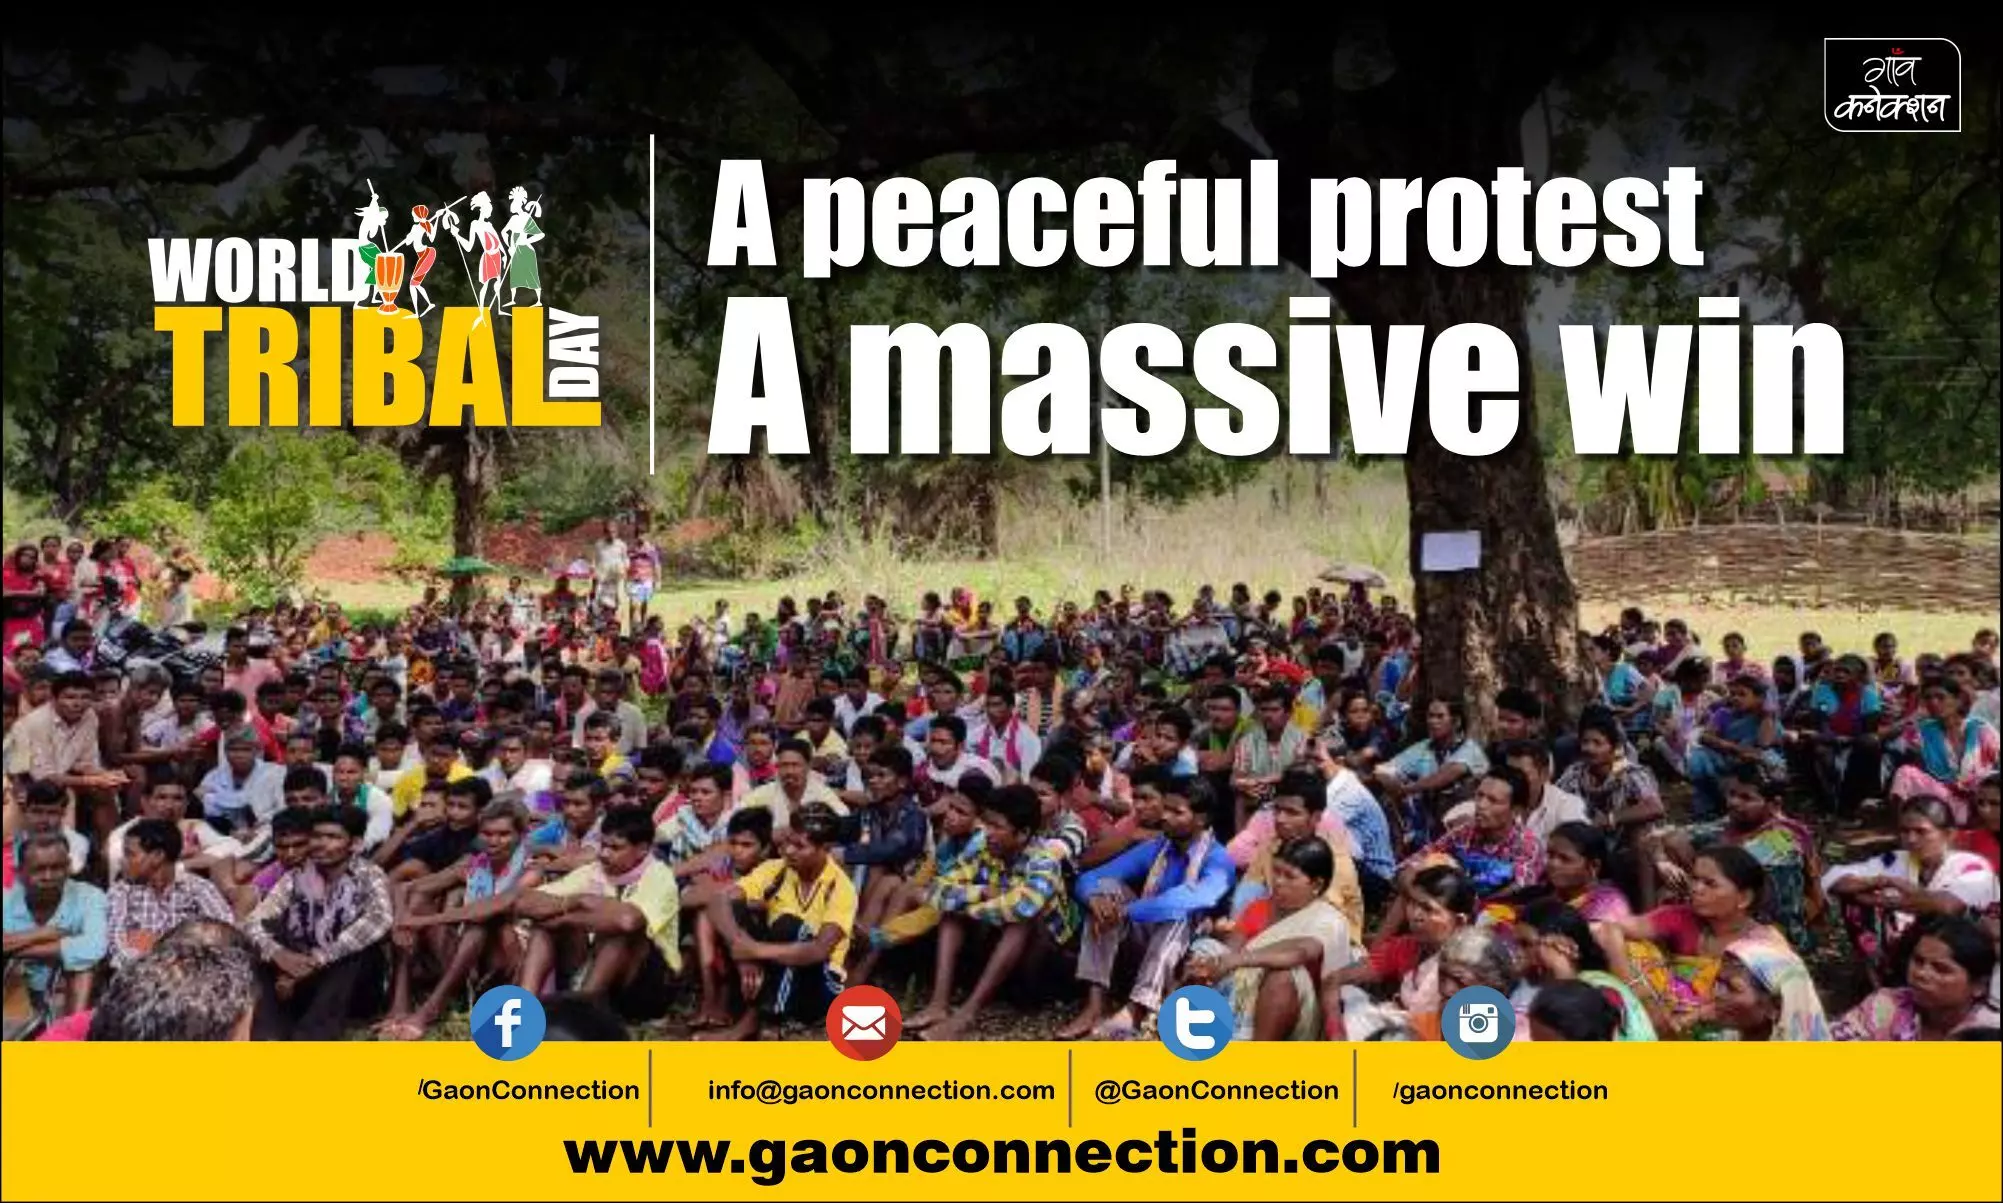 When tribals in Chhattisgarh staged a peaceful protest to protect their jal, jungle, zameen … the govt gave in